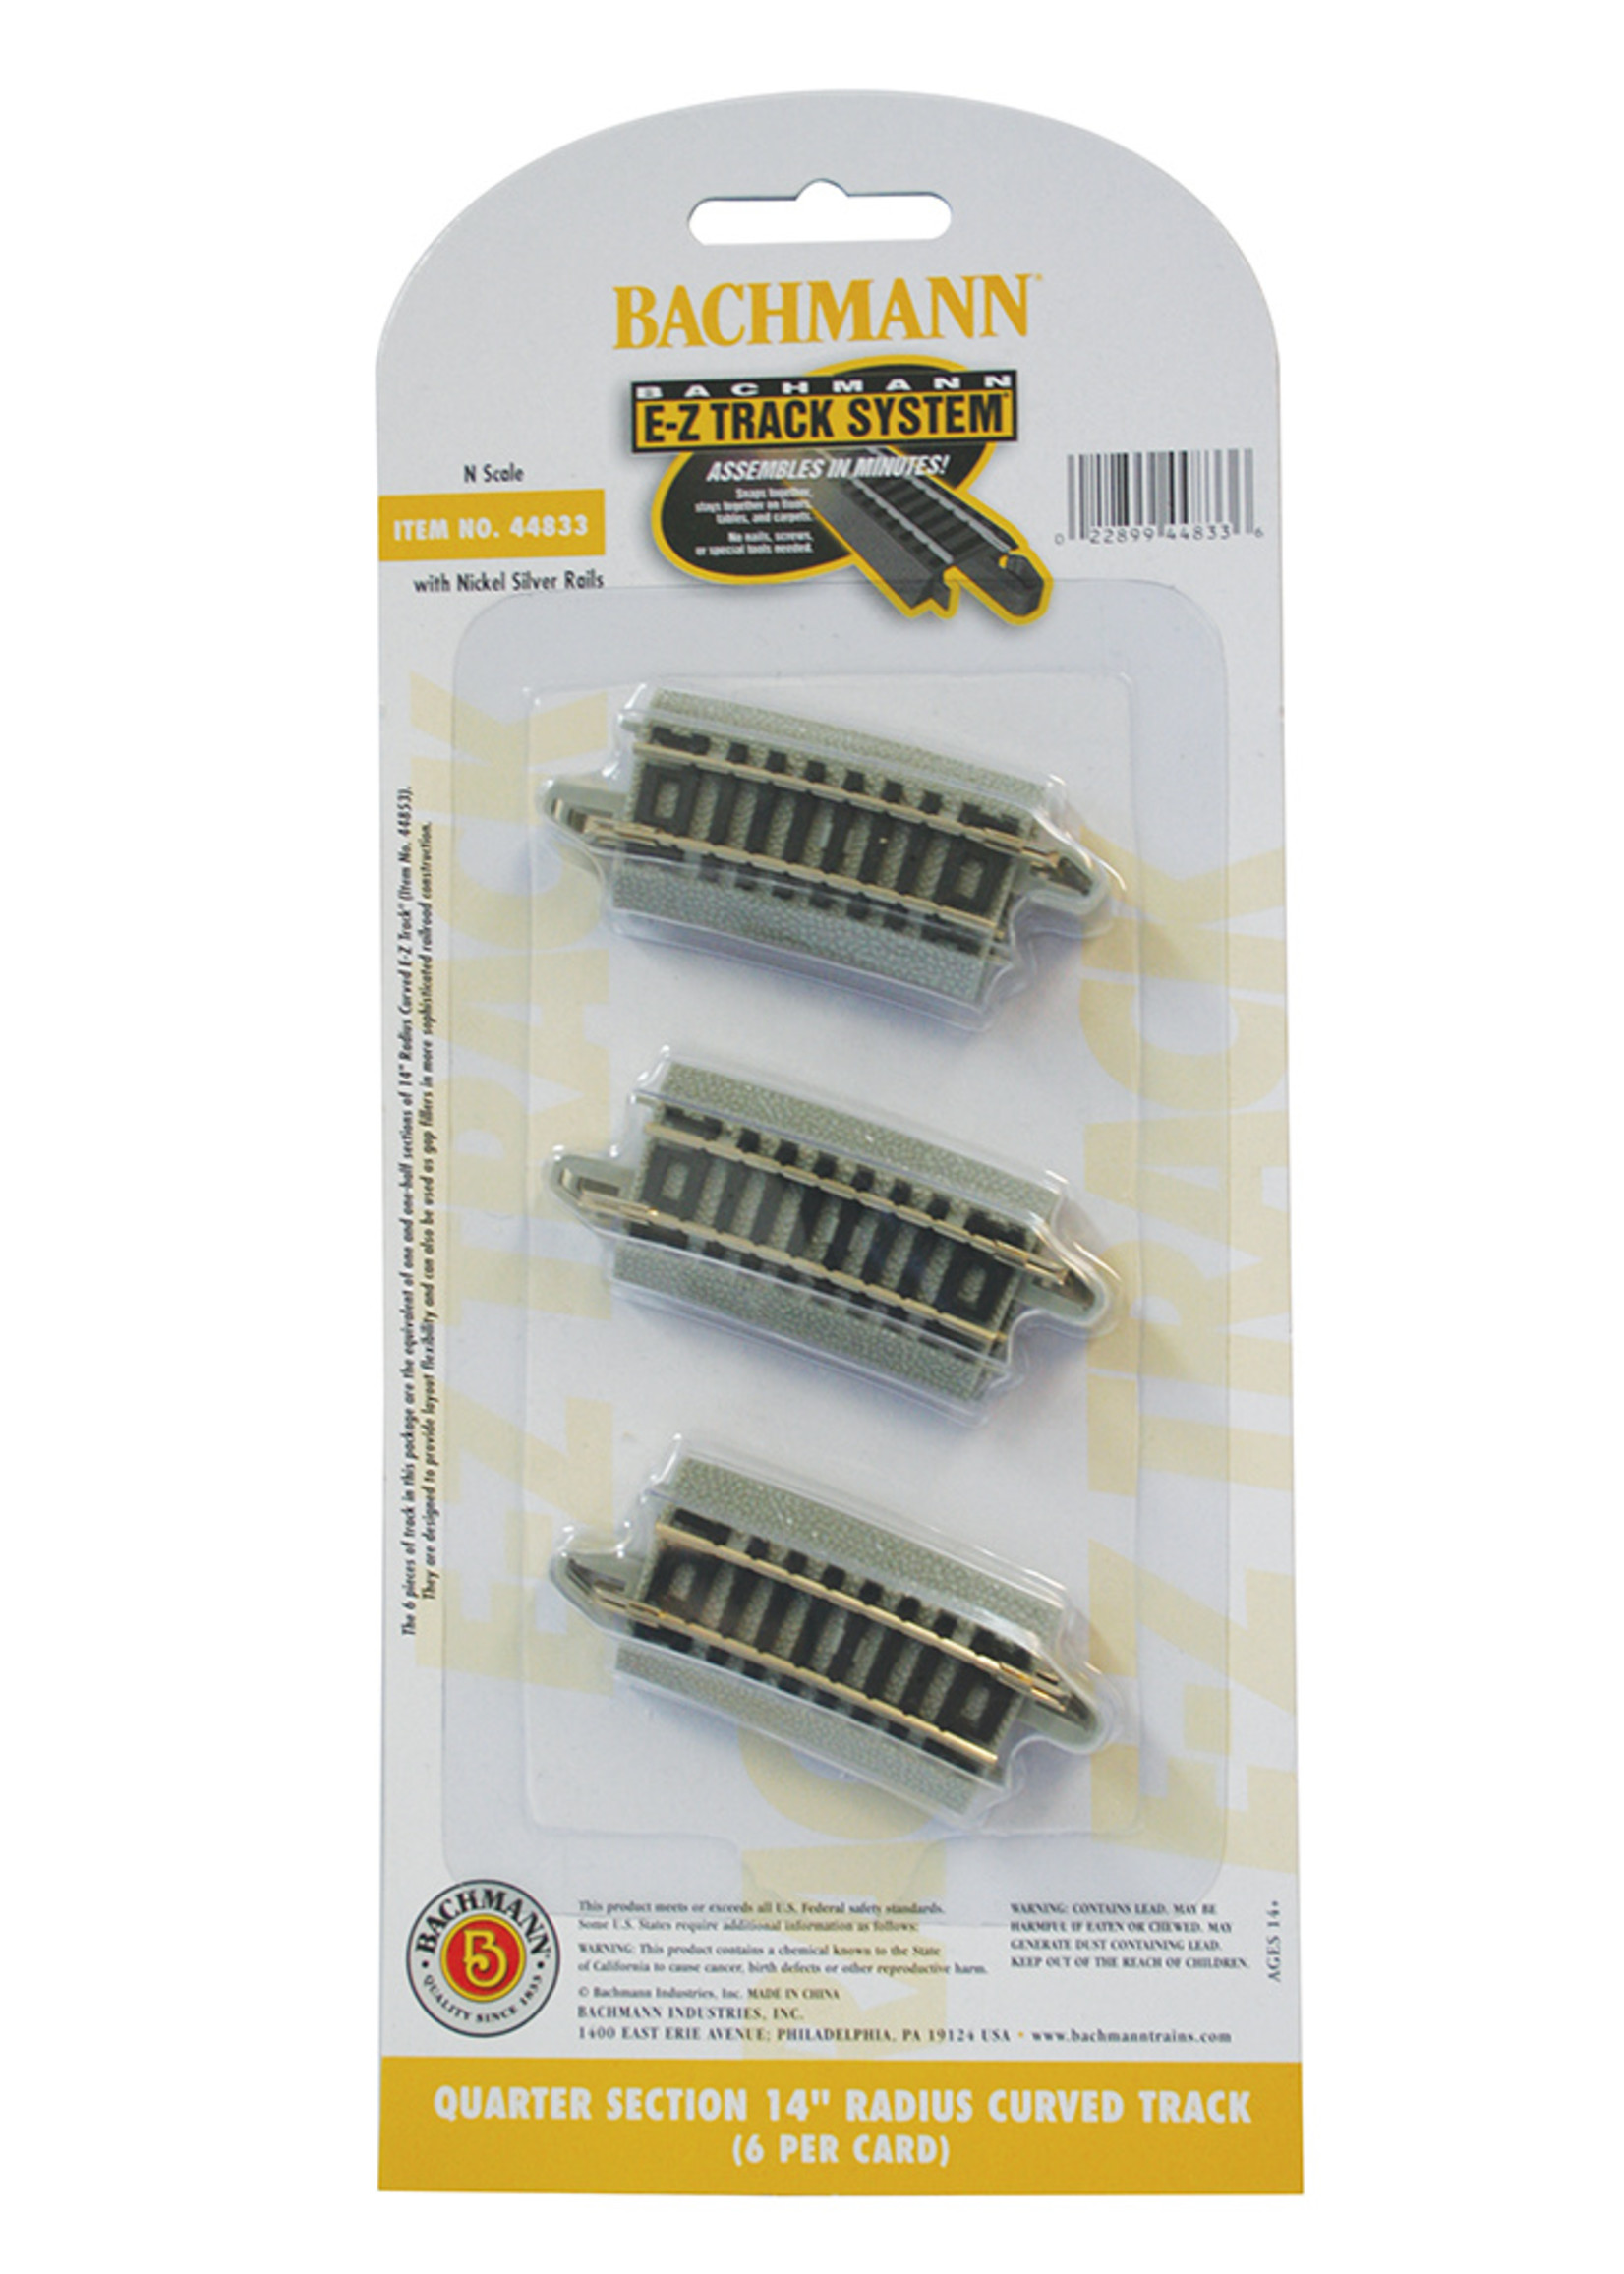 Bachmann 44833 - Quarter Section 14" Radius Curved Track - N Scale EZ Track